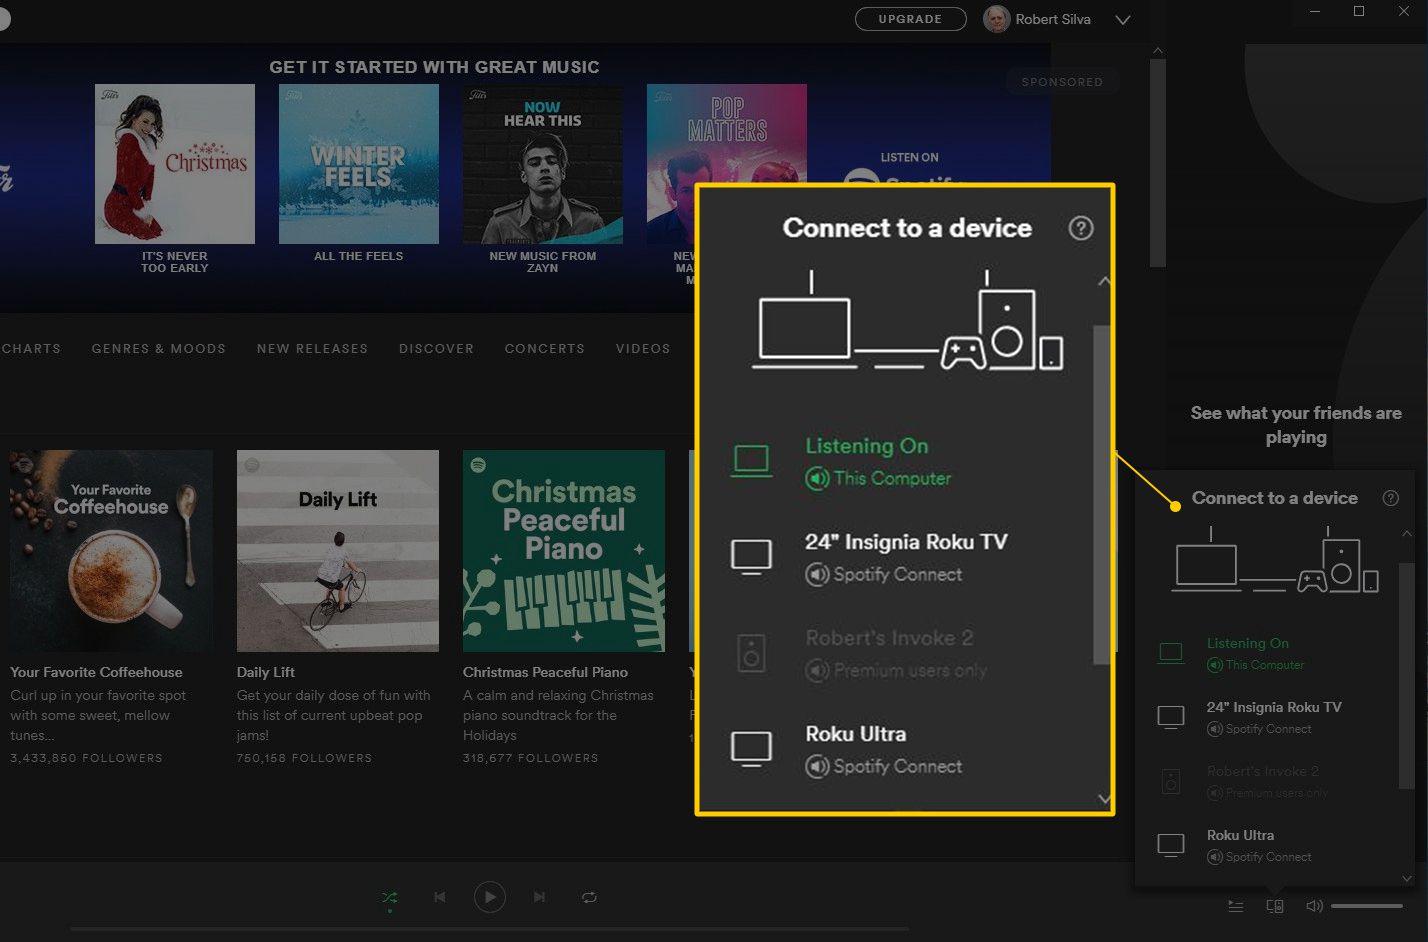 002_what-is-spotify-connect-and-how-to-use-it-4570995-5c0436b9c9e77c0001a30f3d.jpg